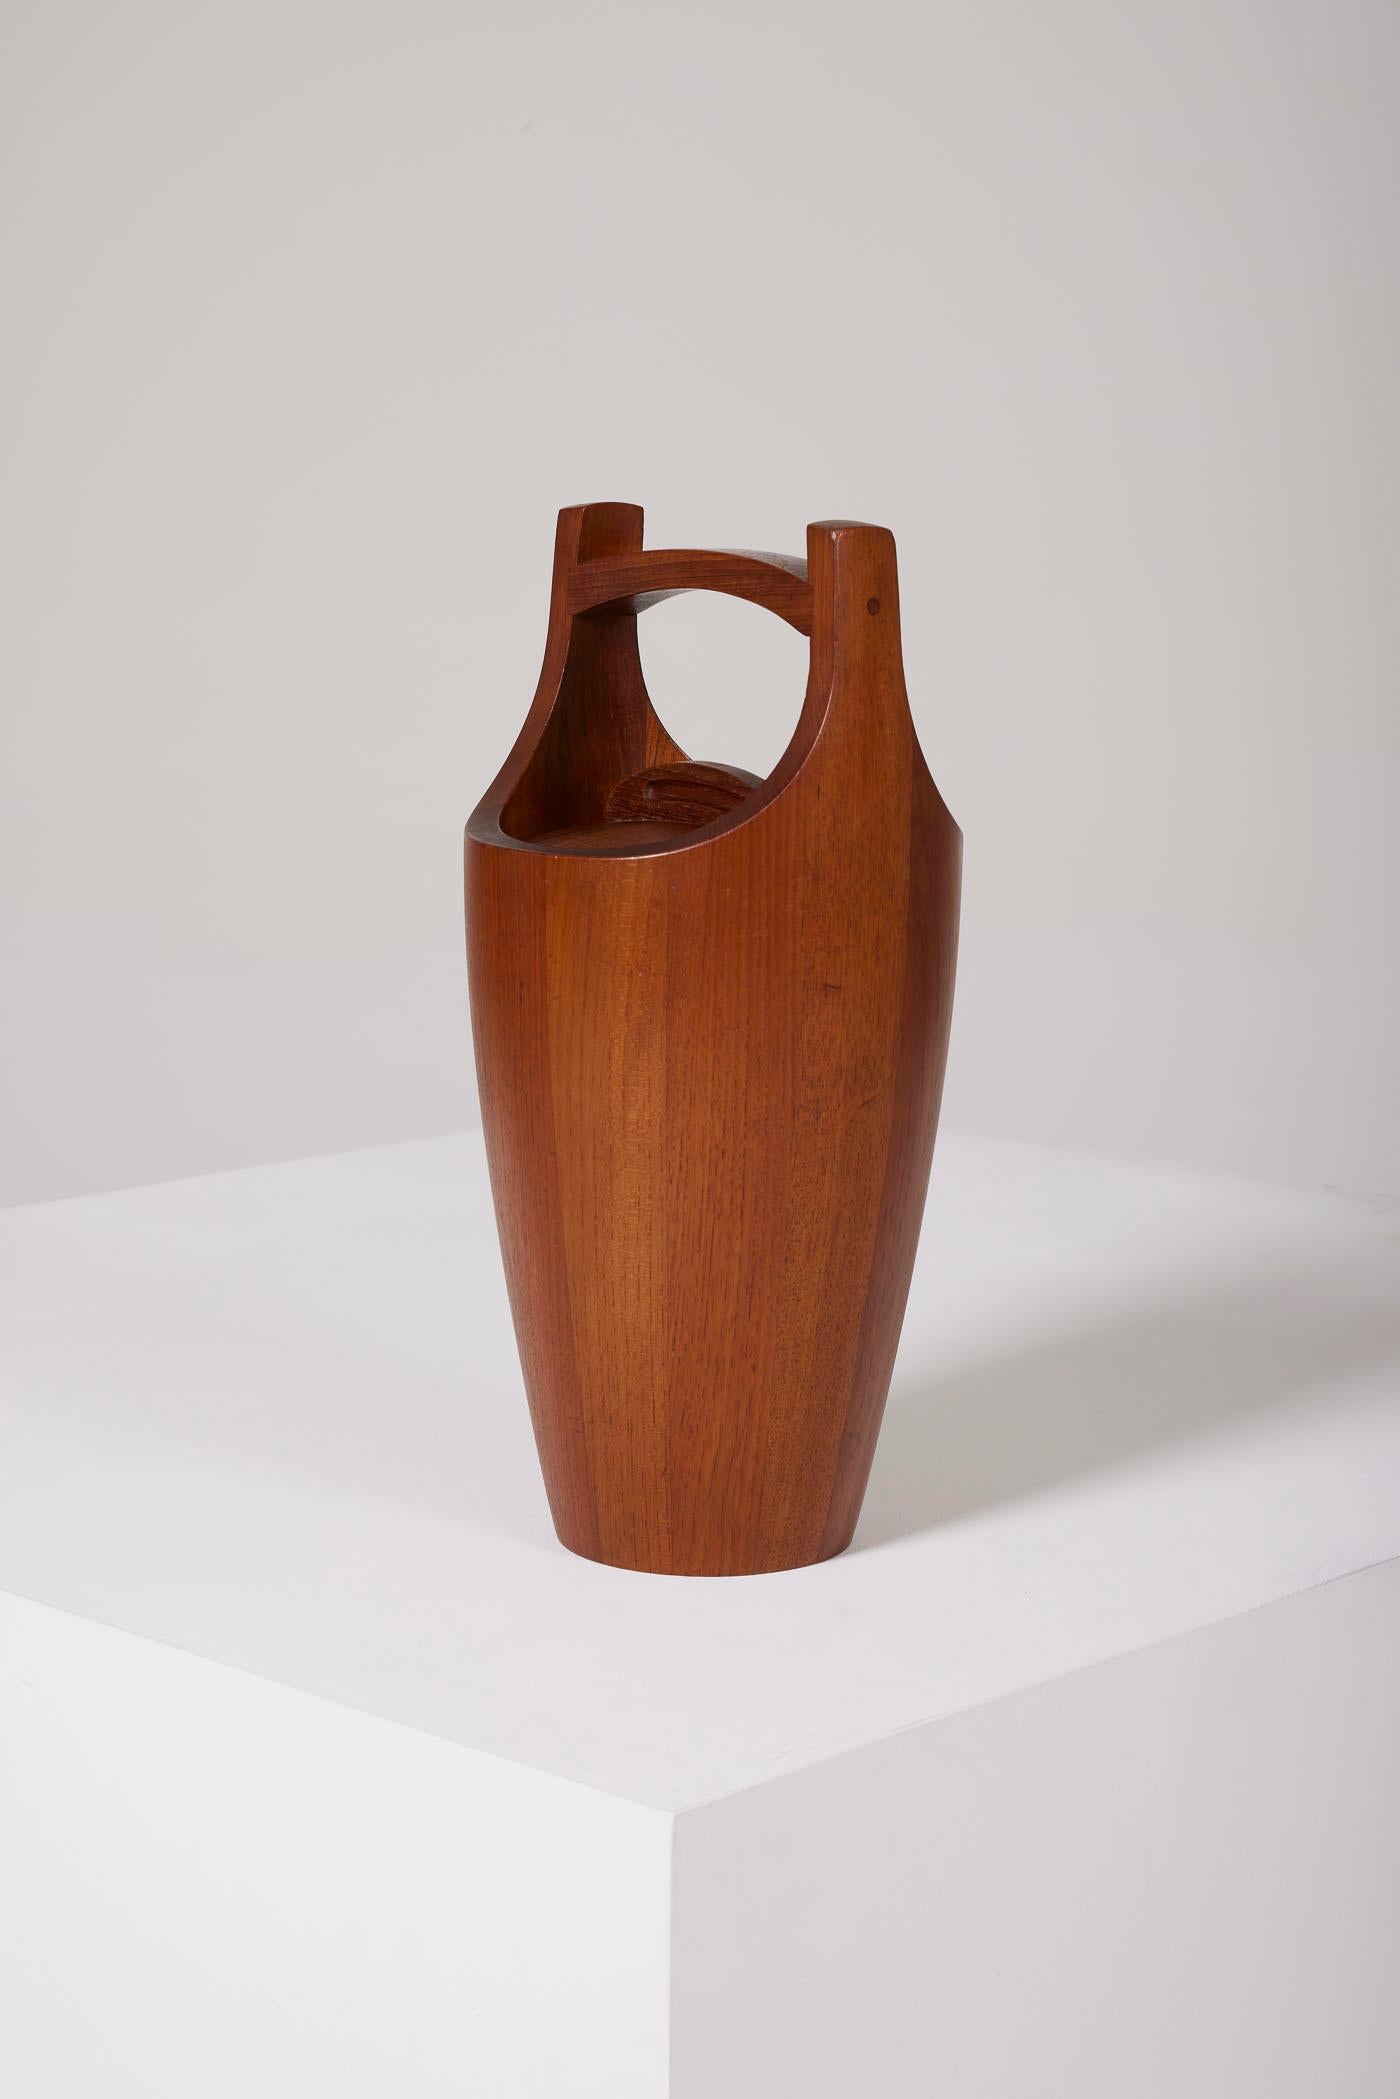 Ice bucket in wood by Jens Quitsgaard For Sale 1